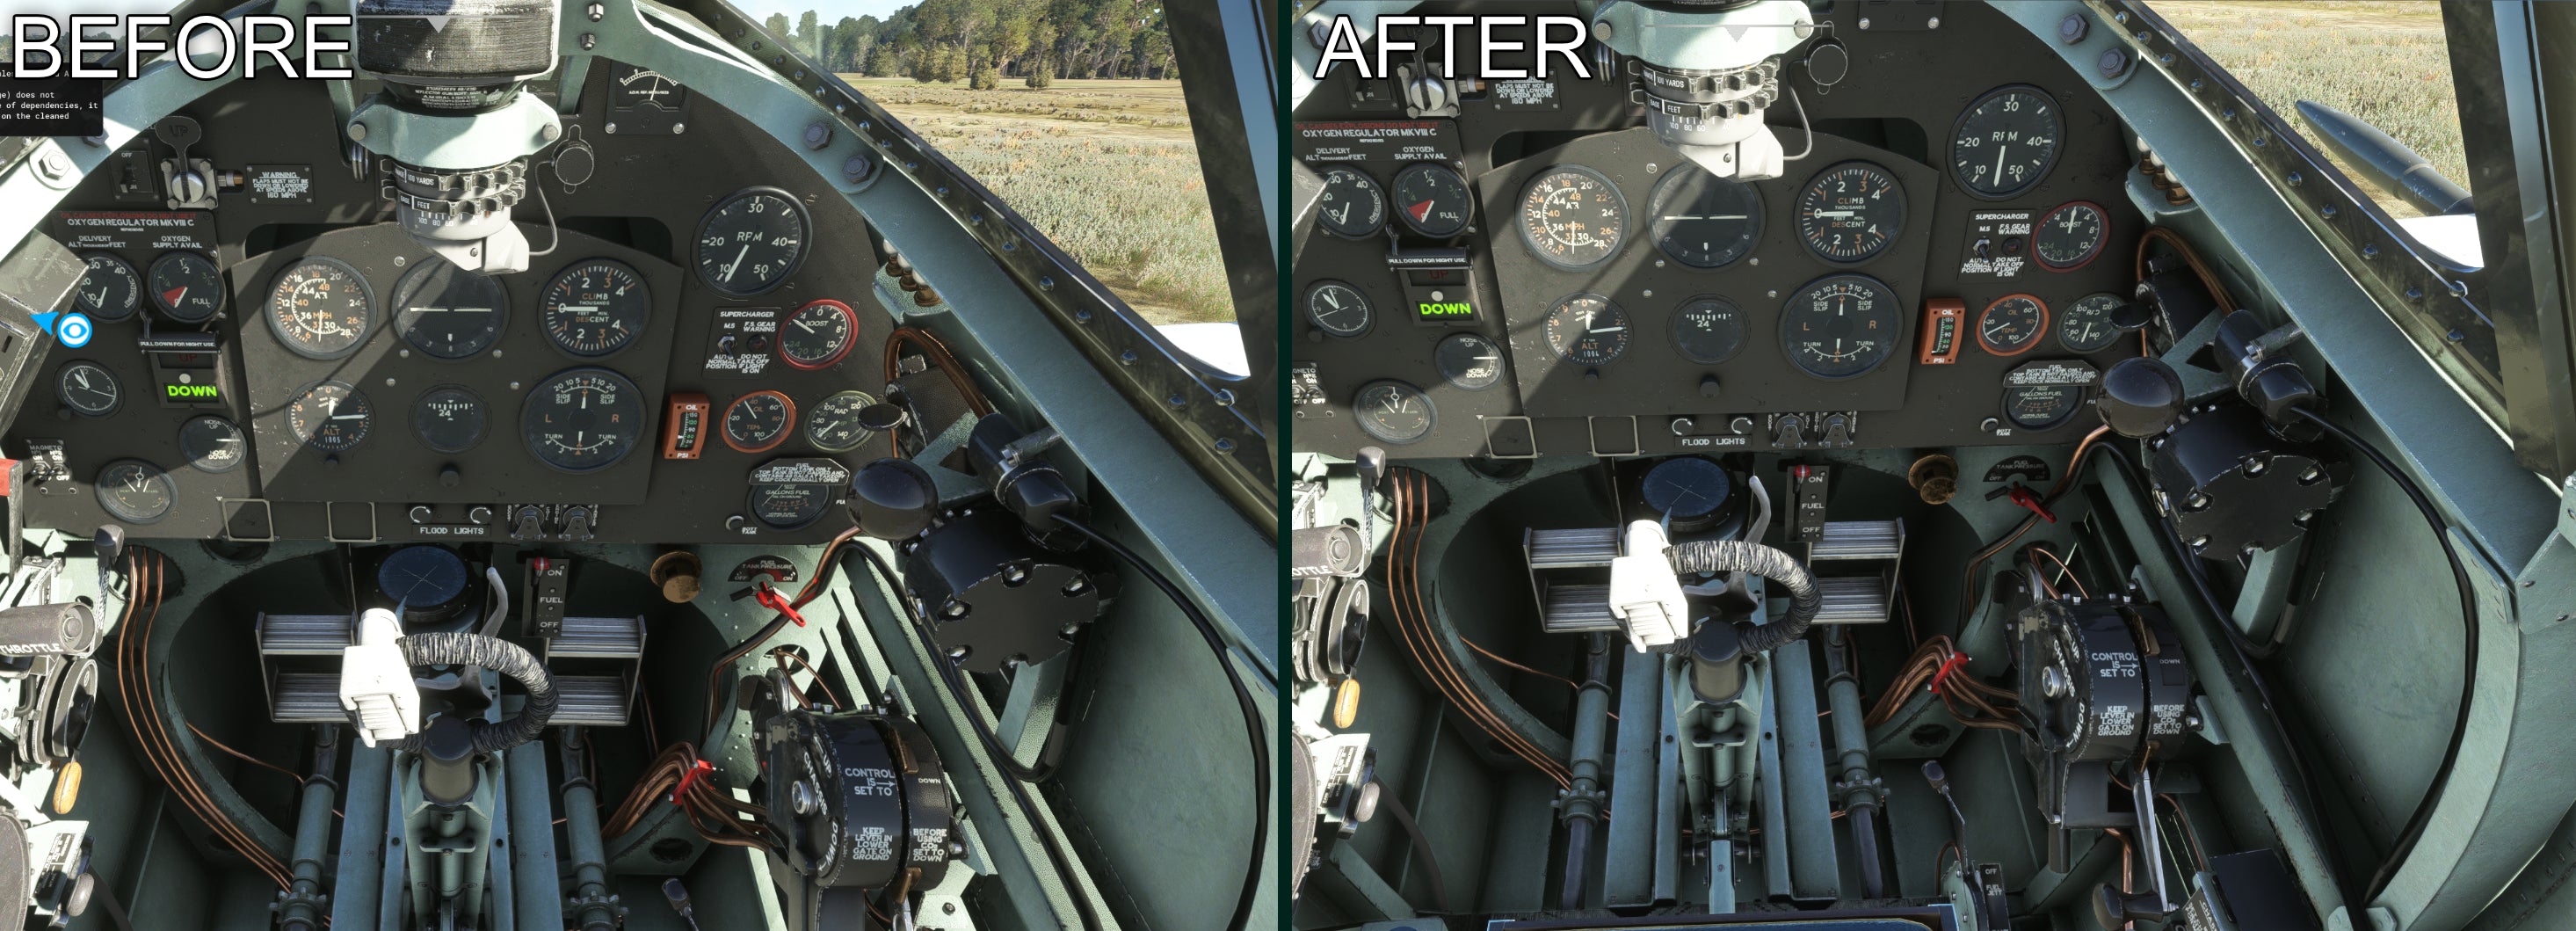 Spitfire cockpit before and after the light leaking fix